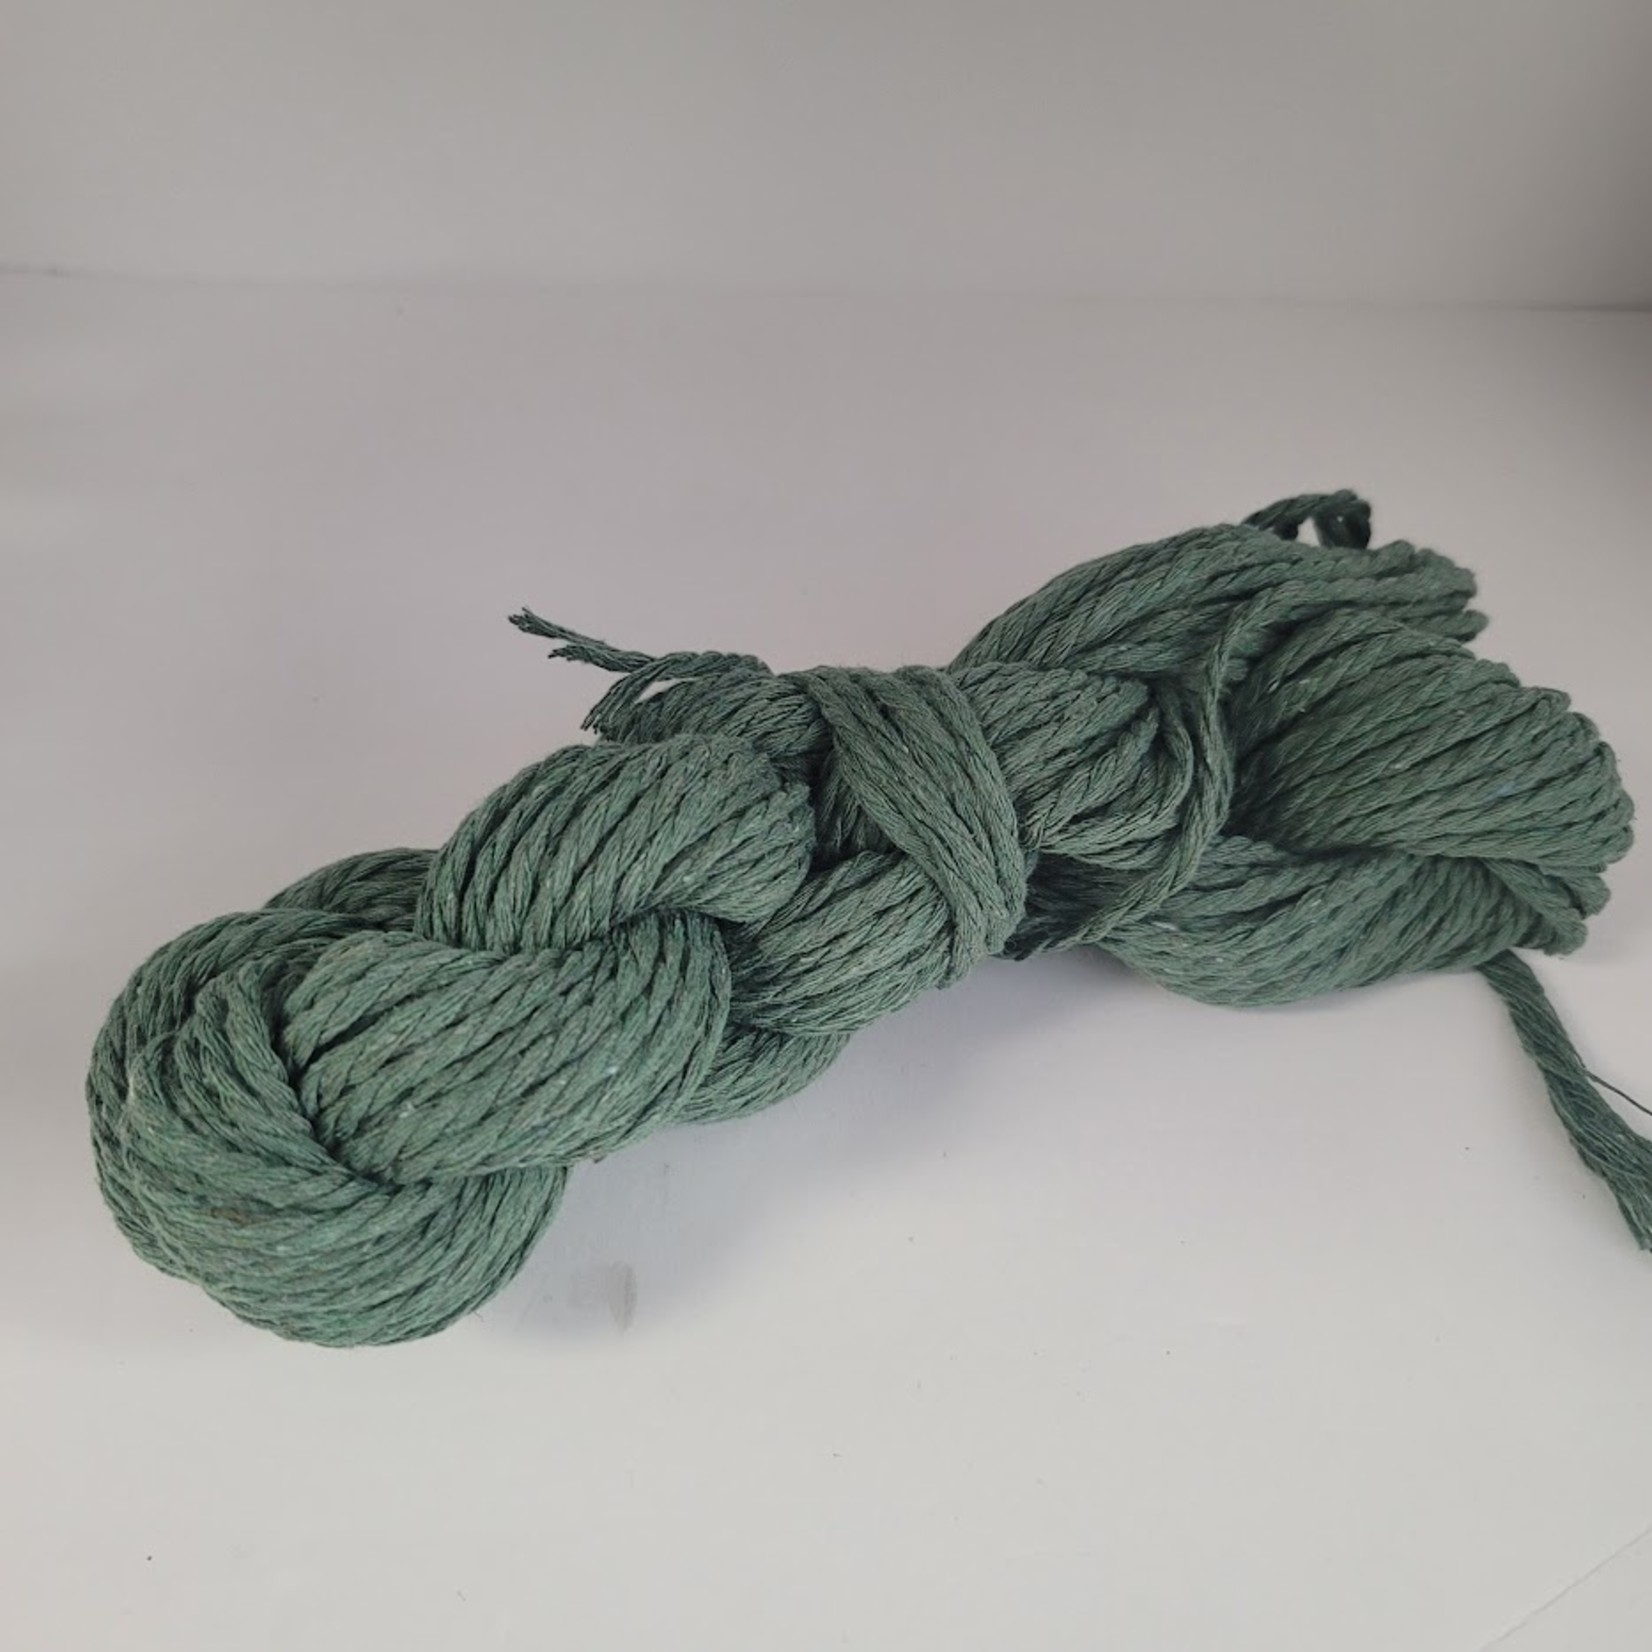 3mm Macrame 3 ply Cord - Approx 50m = 164ft - Ivy